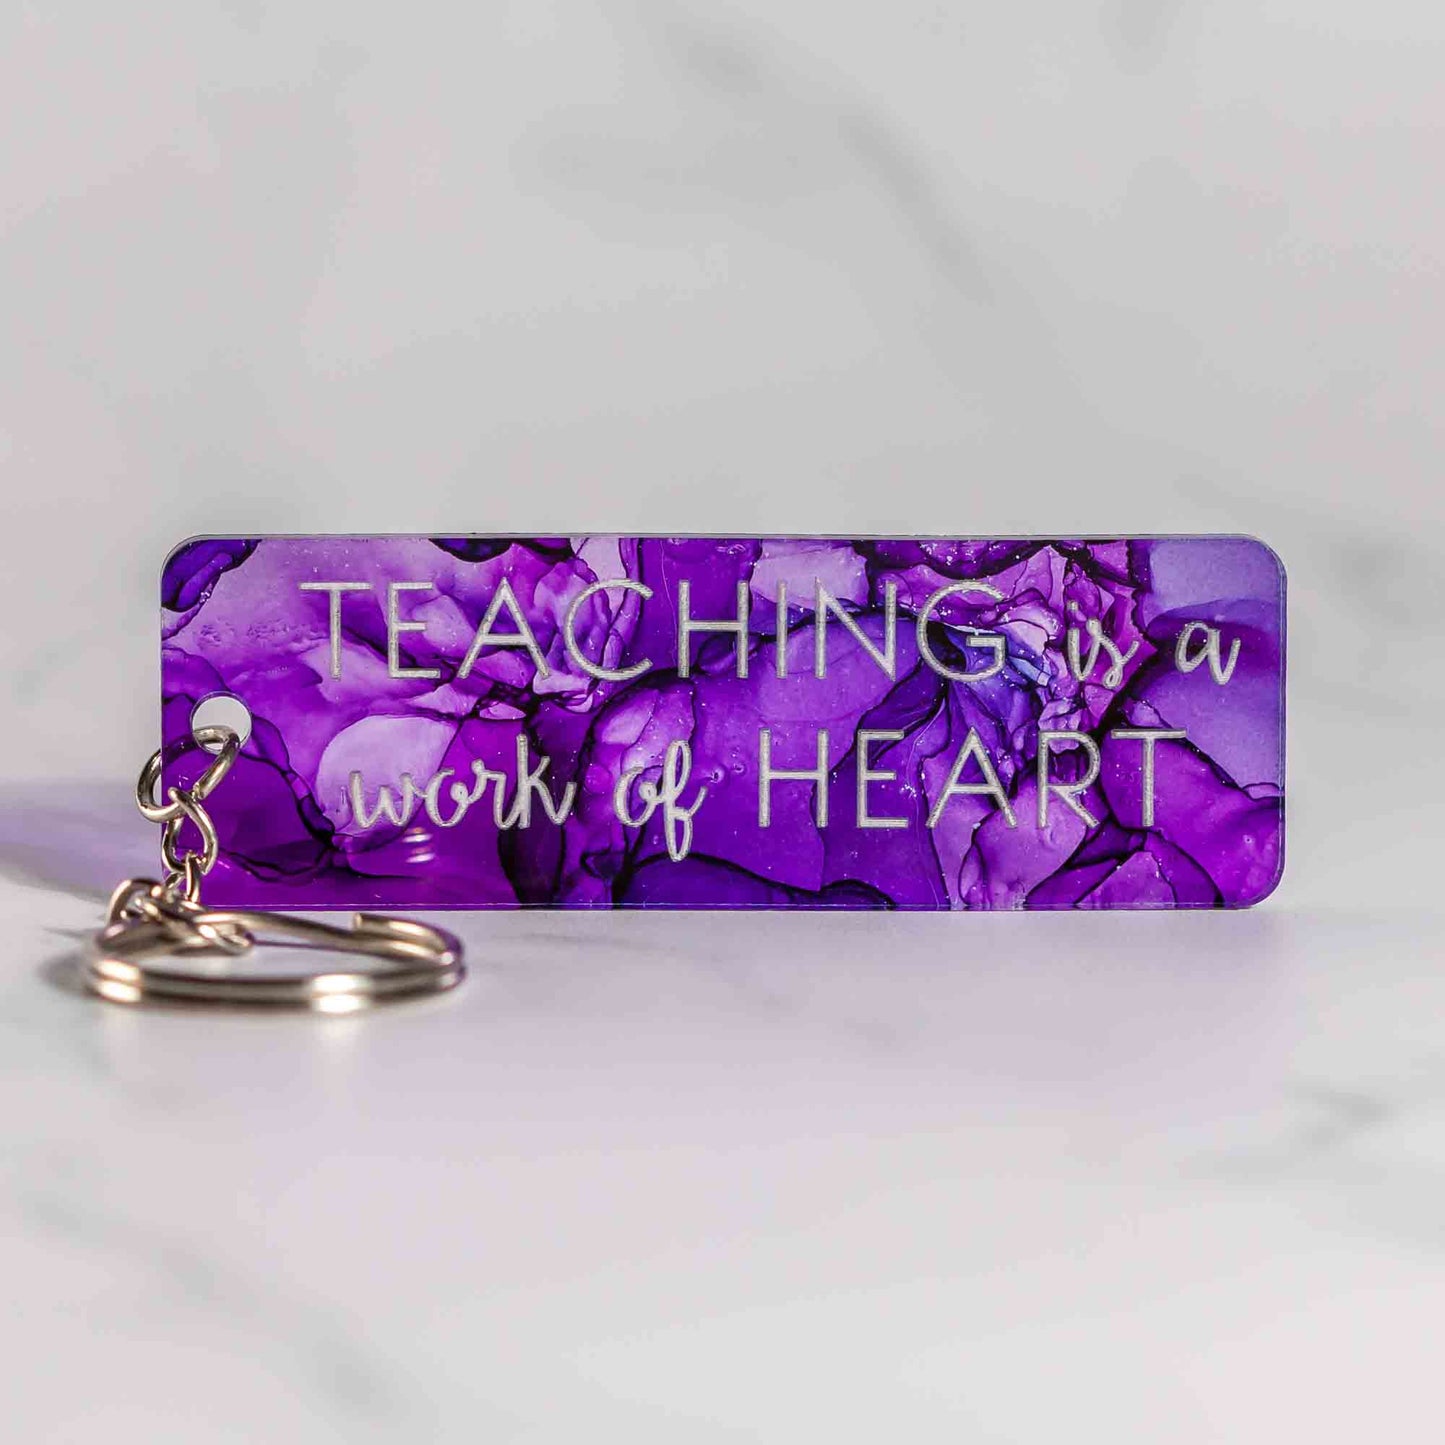 Alcohol Ink Quotes for Teacher Appreciation Keychains - Purple Alcohol Ink Colorway - Collaboration of West Meadow Creative and LeeMo Designs in Bend, Oregon